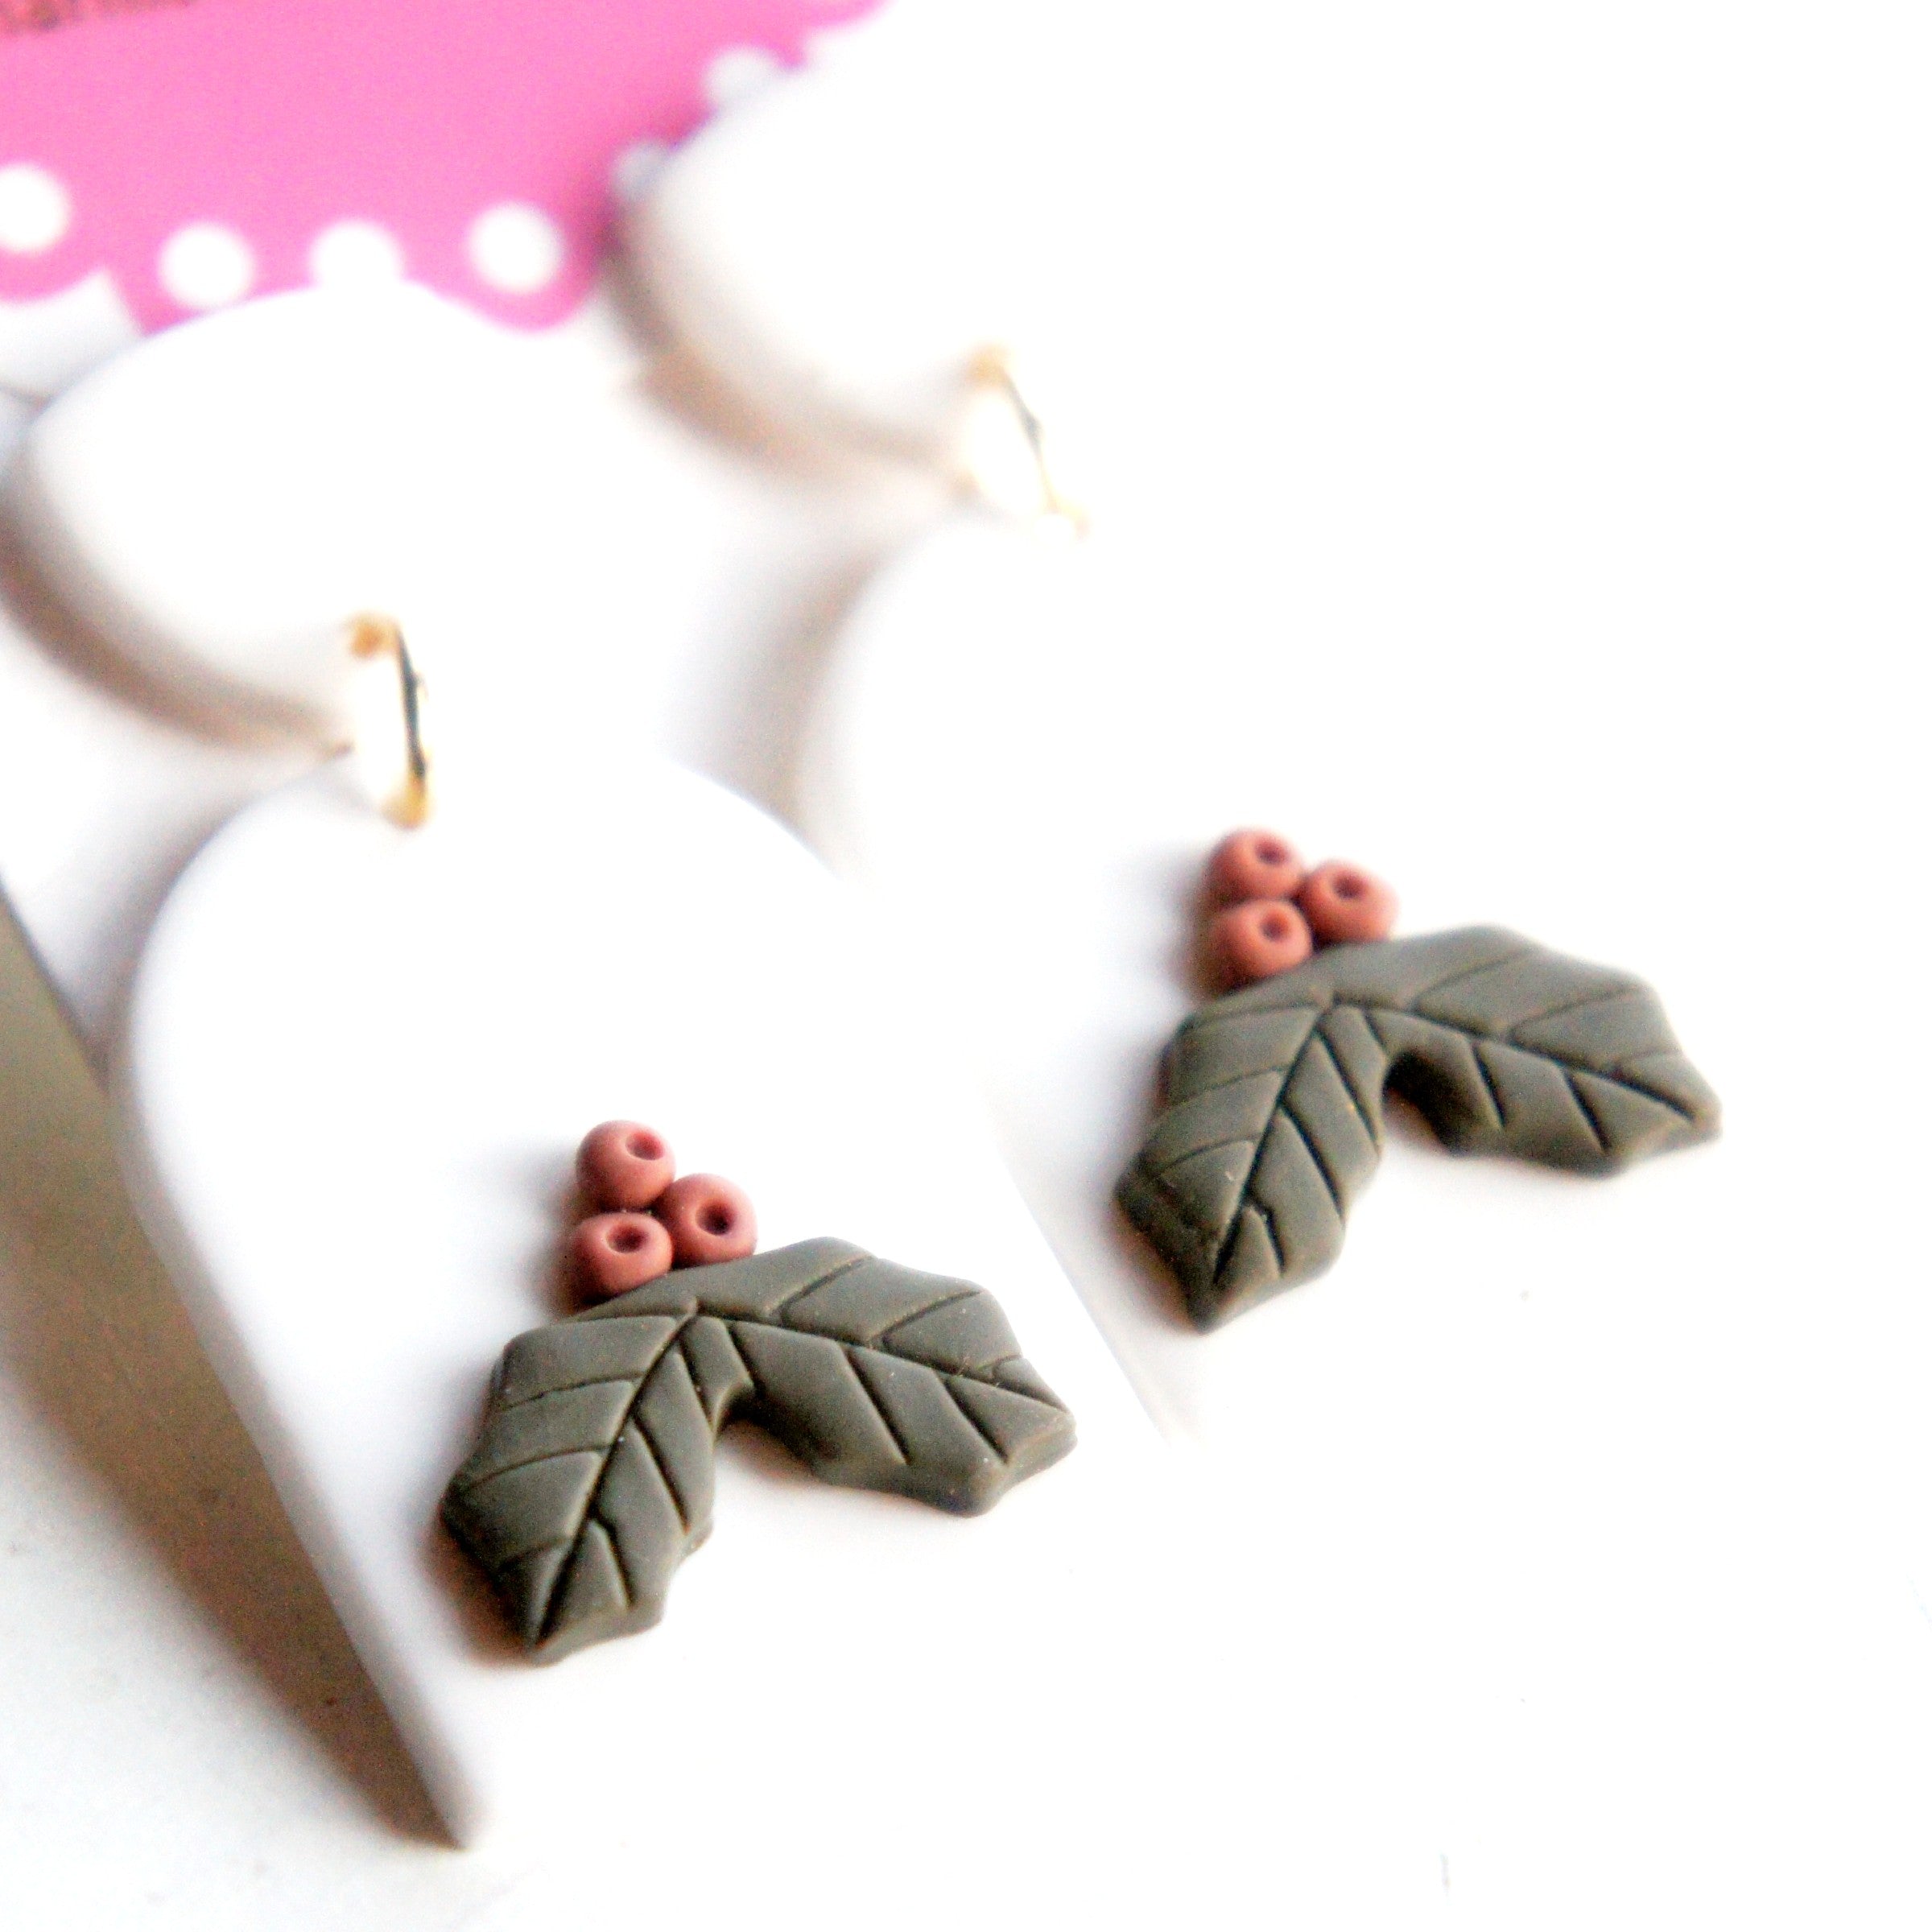 Mistletoe Clay Dangle Earrings - Jillicious charms and accessories